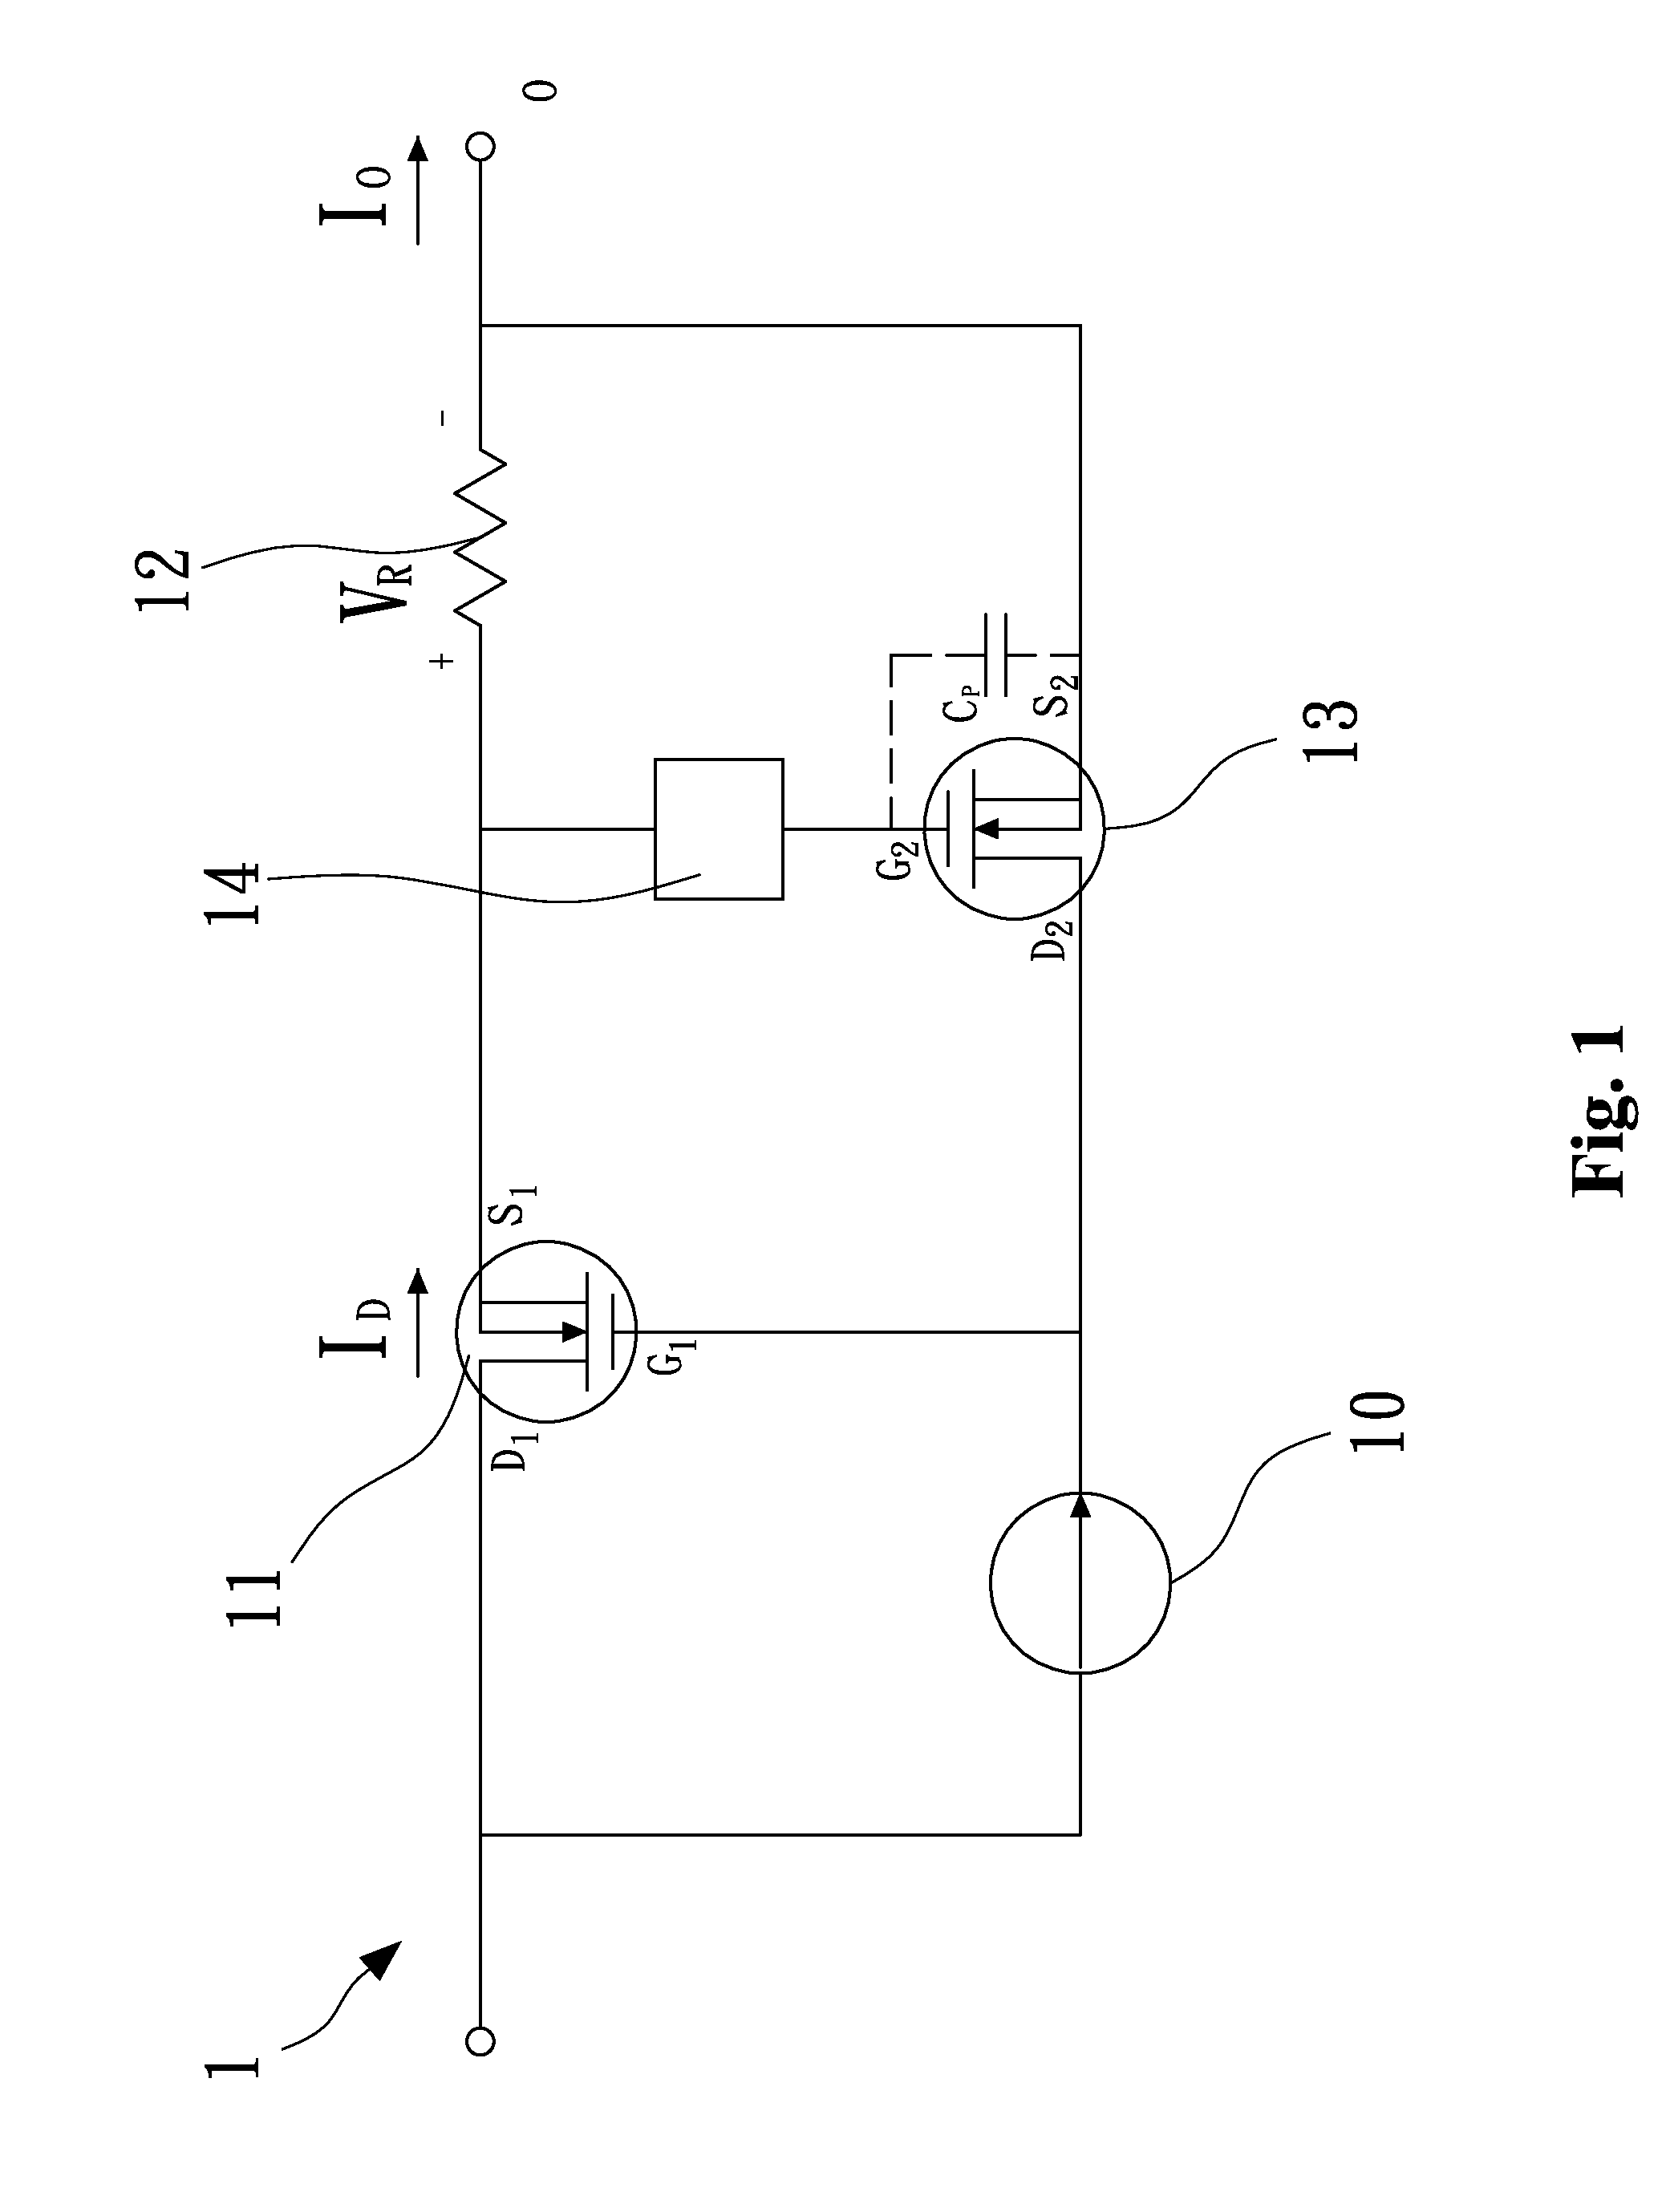 Limiting current circuit that has output short circuit protection